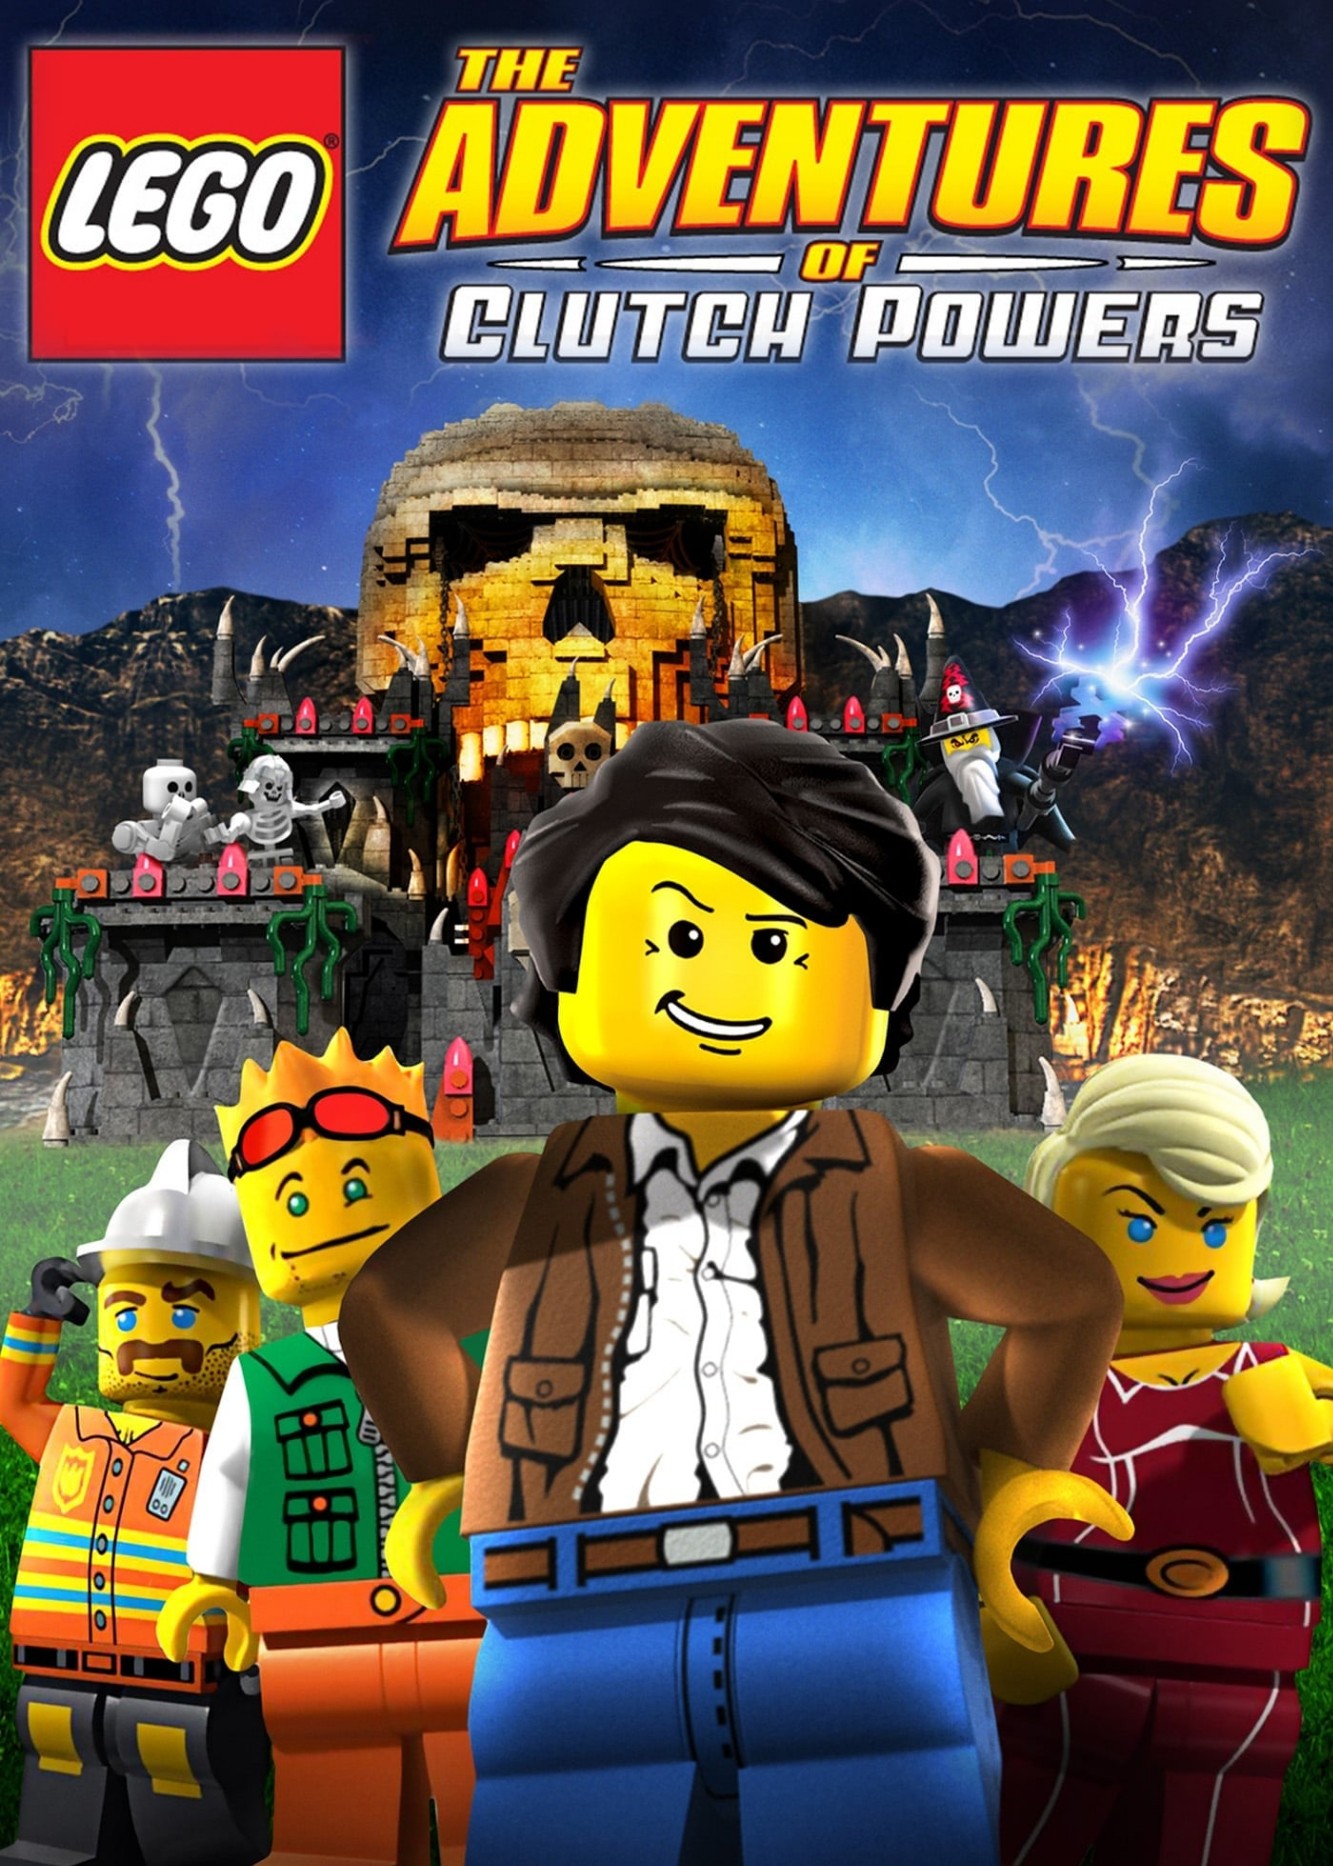 Lego: The Adventures of Clutch Powers 2010